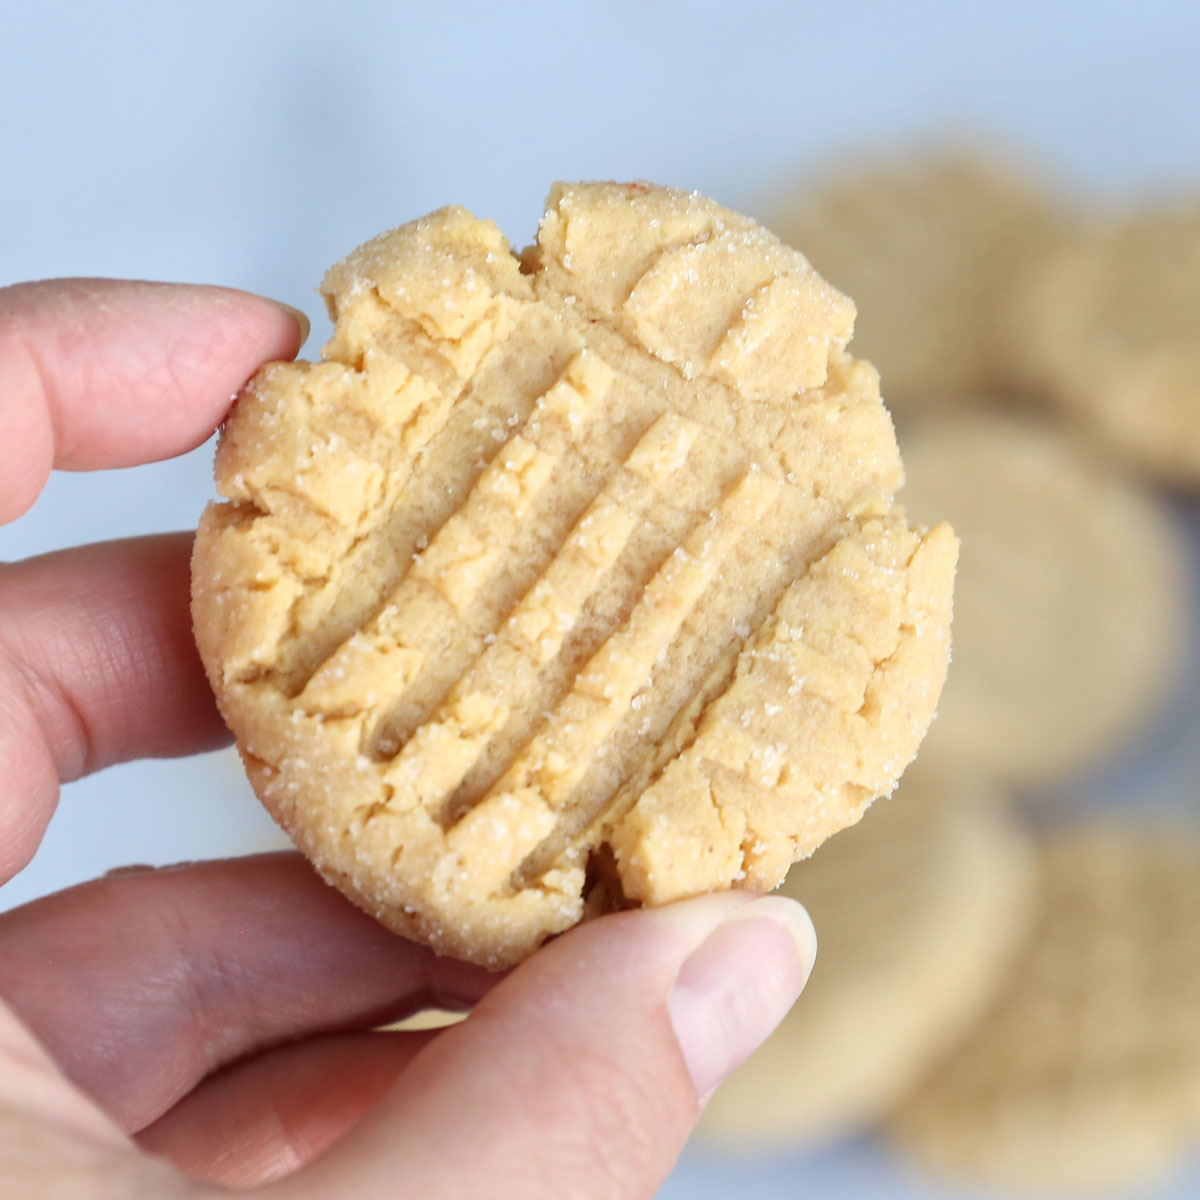 Hand holding a peanut butter cookie